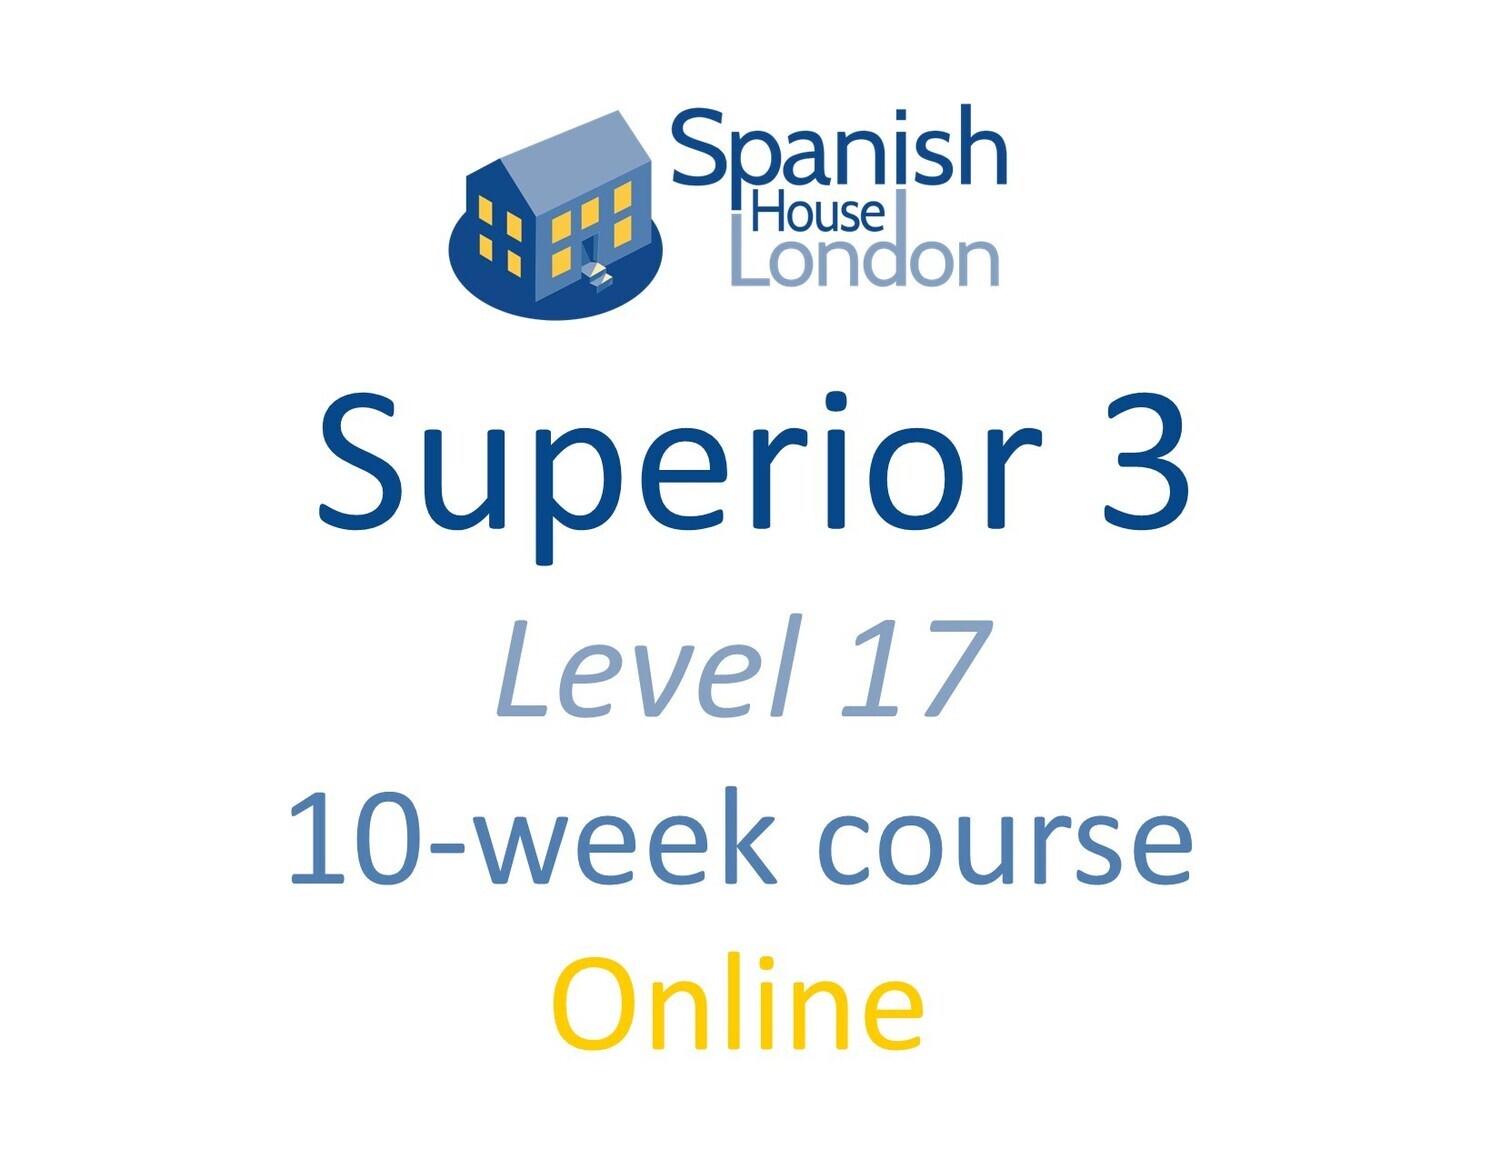 Superior 3 Course starting on 20th May at 7.30pm Online